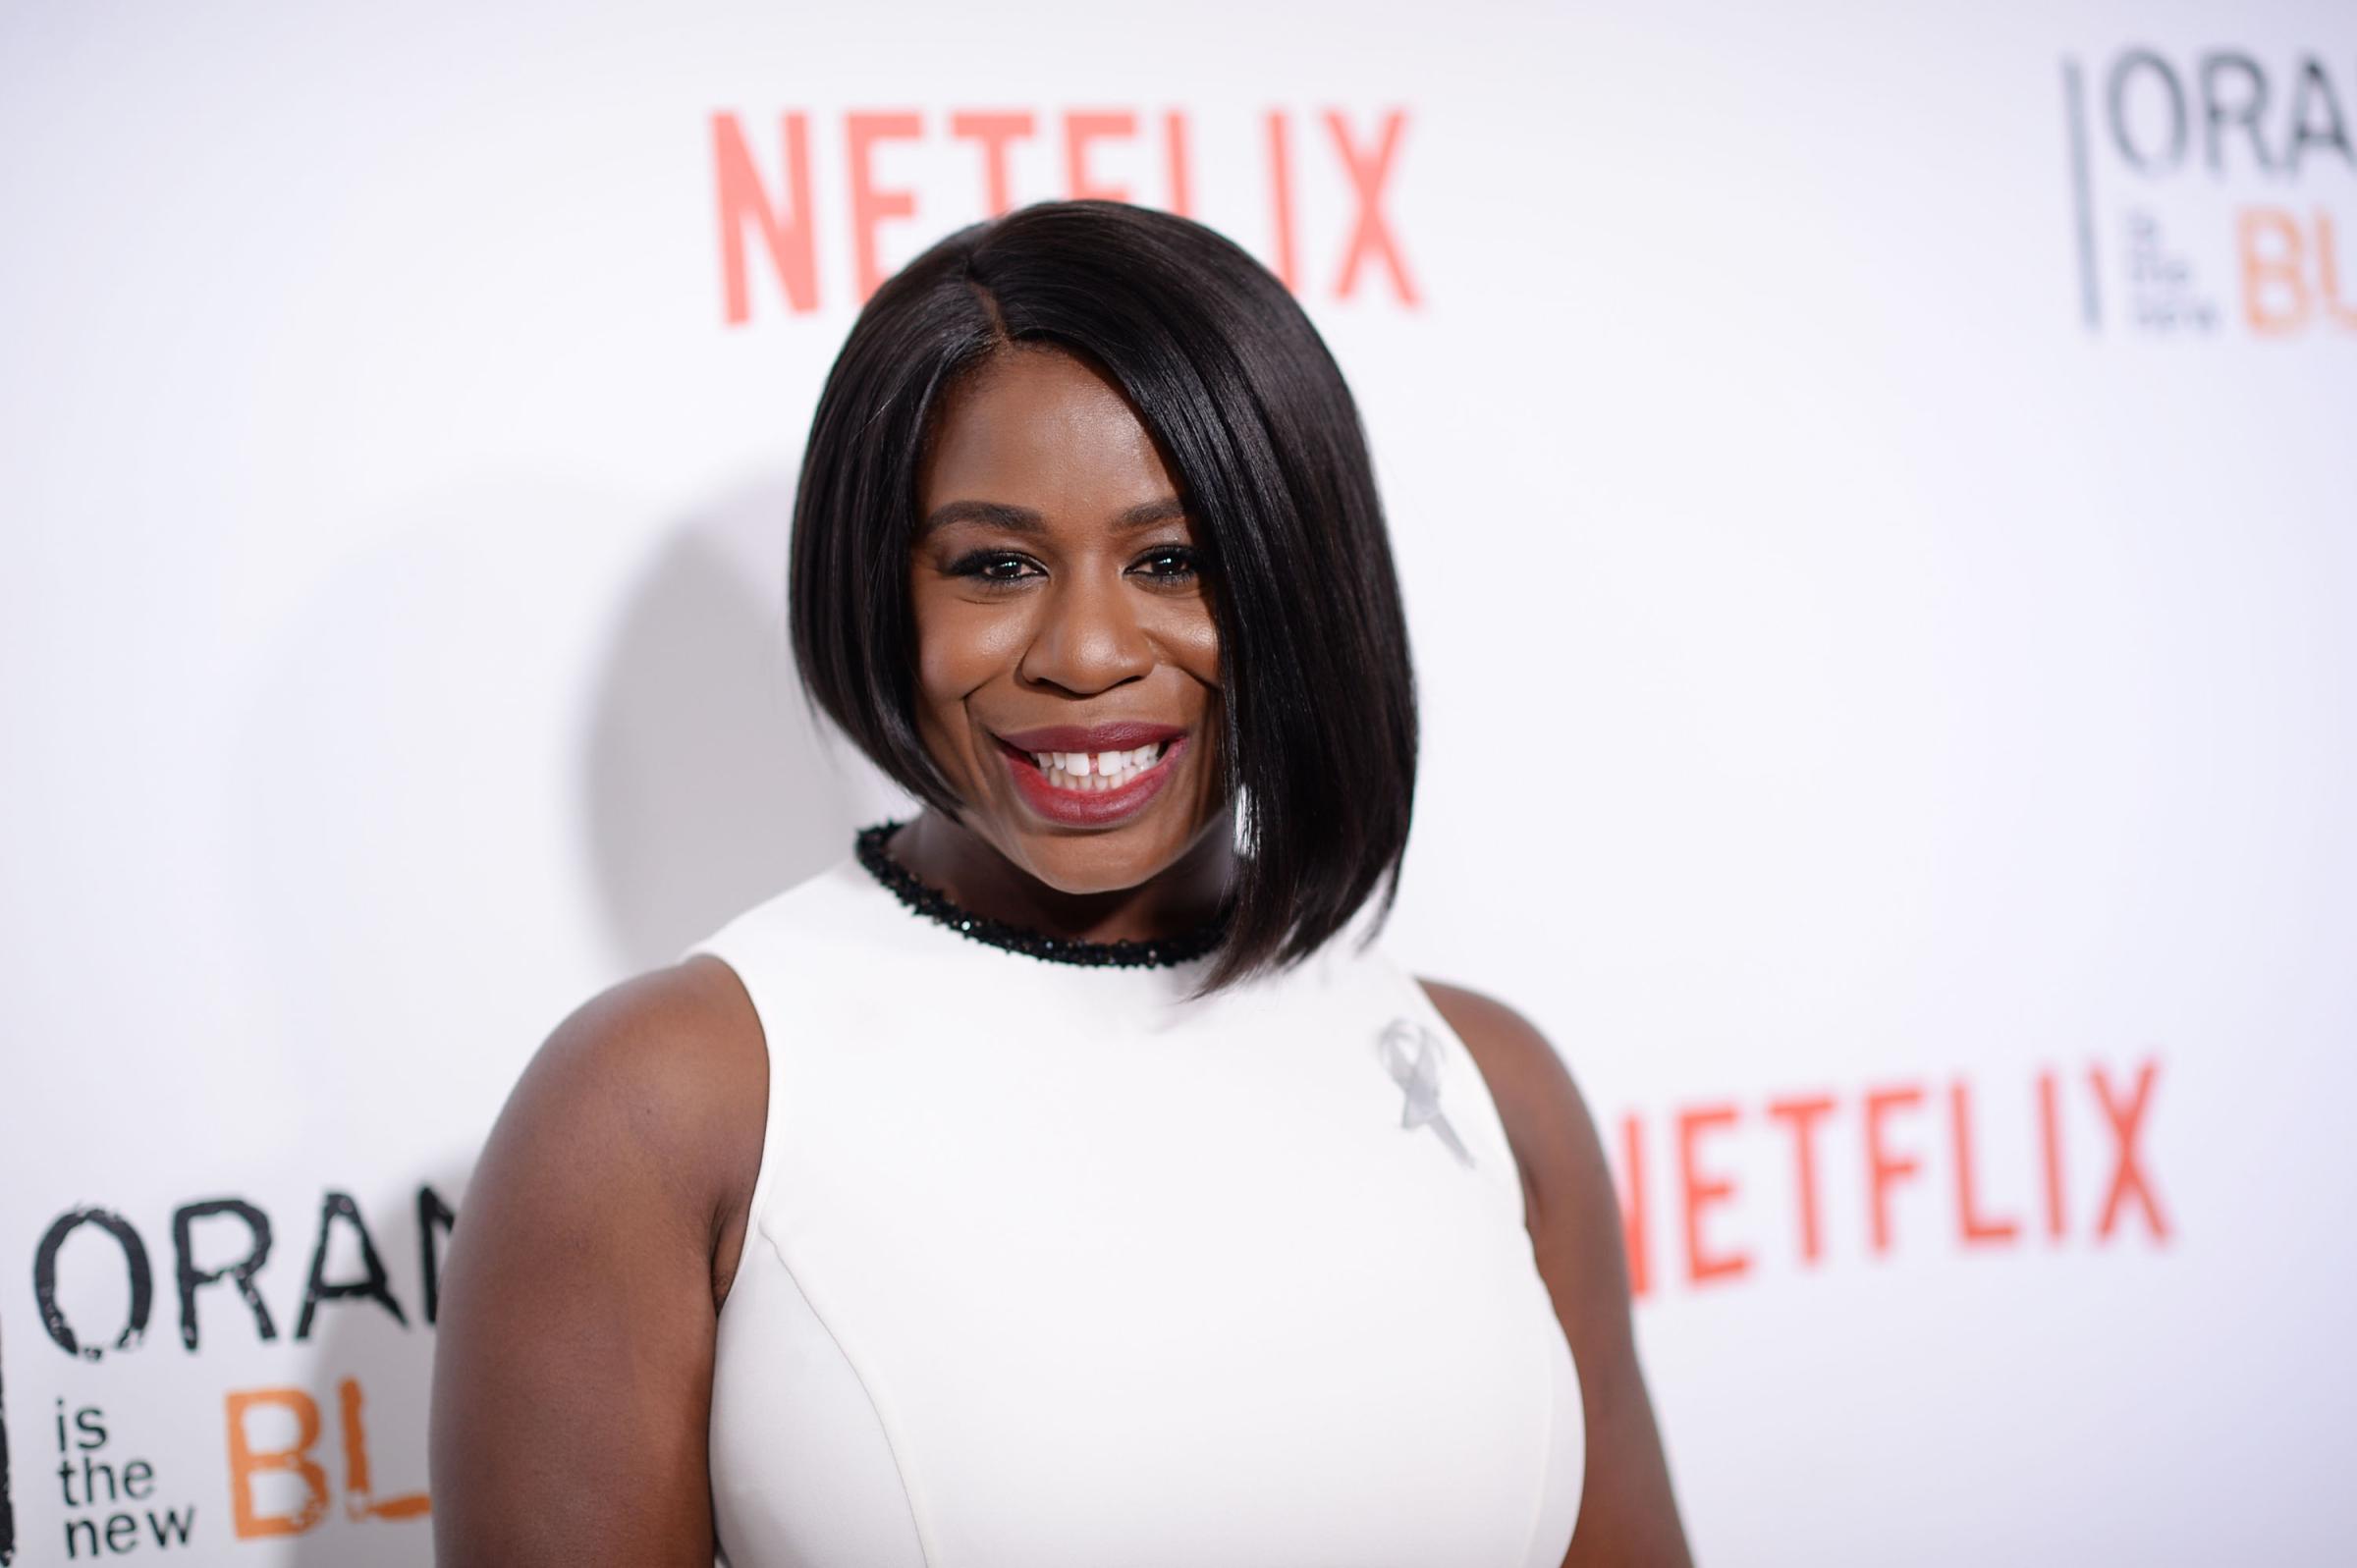 Uzo Aduba attends "Orange Is The New Black" premiere at SVA Theater on June 16, 2016 in New York City.